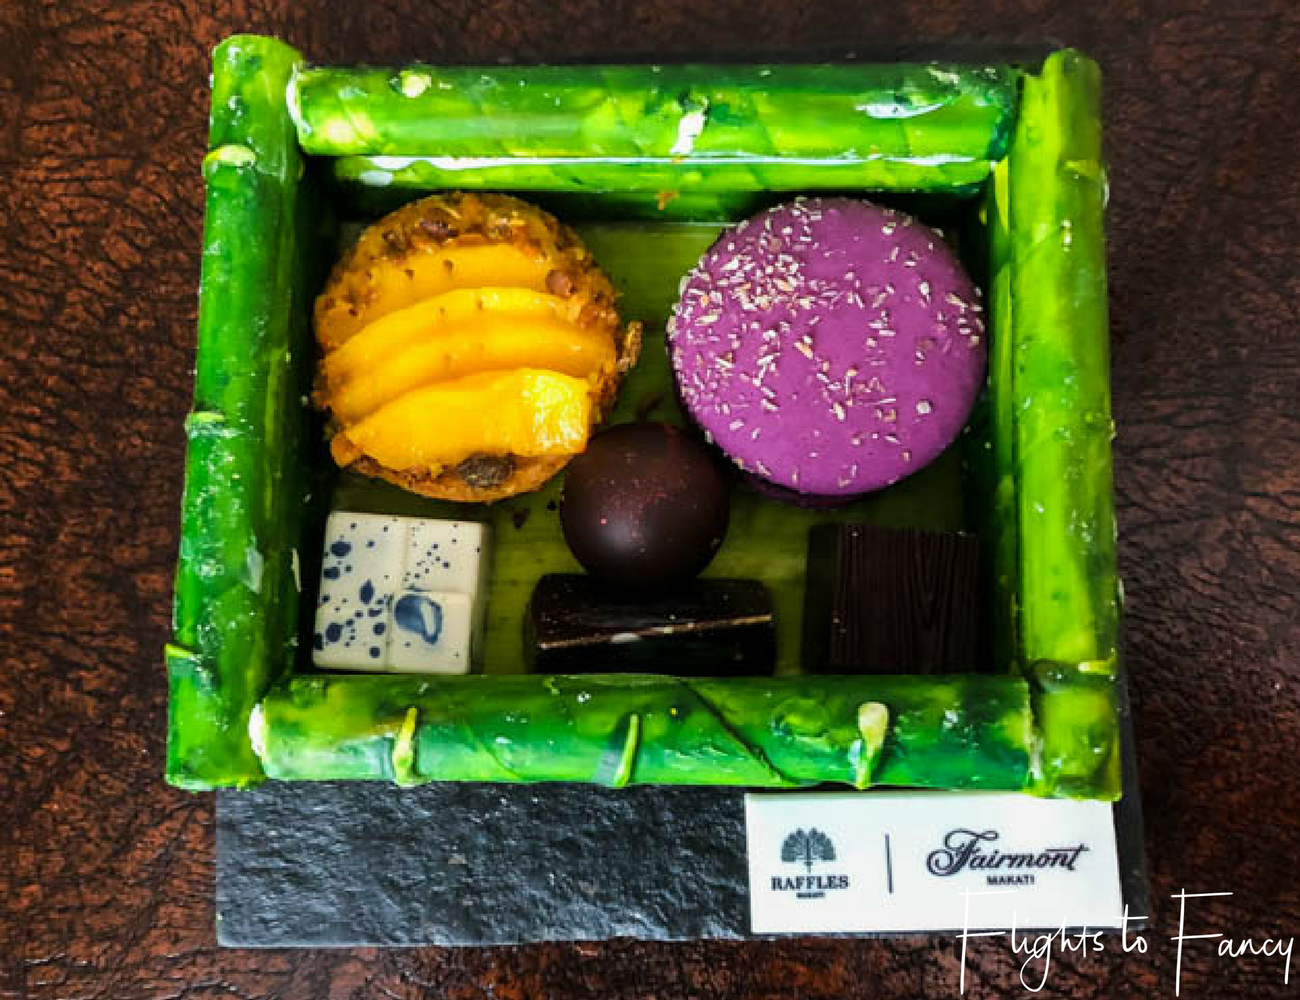 Flights To Fancy at Raffles Makati - Fancy chocolate art is one of the perks of staying at luxury hotels in Manila